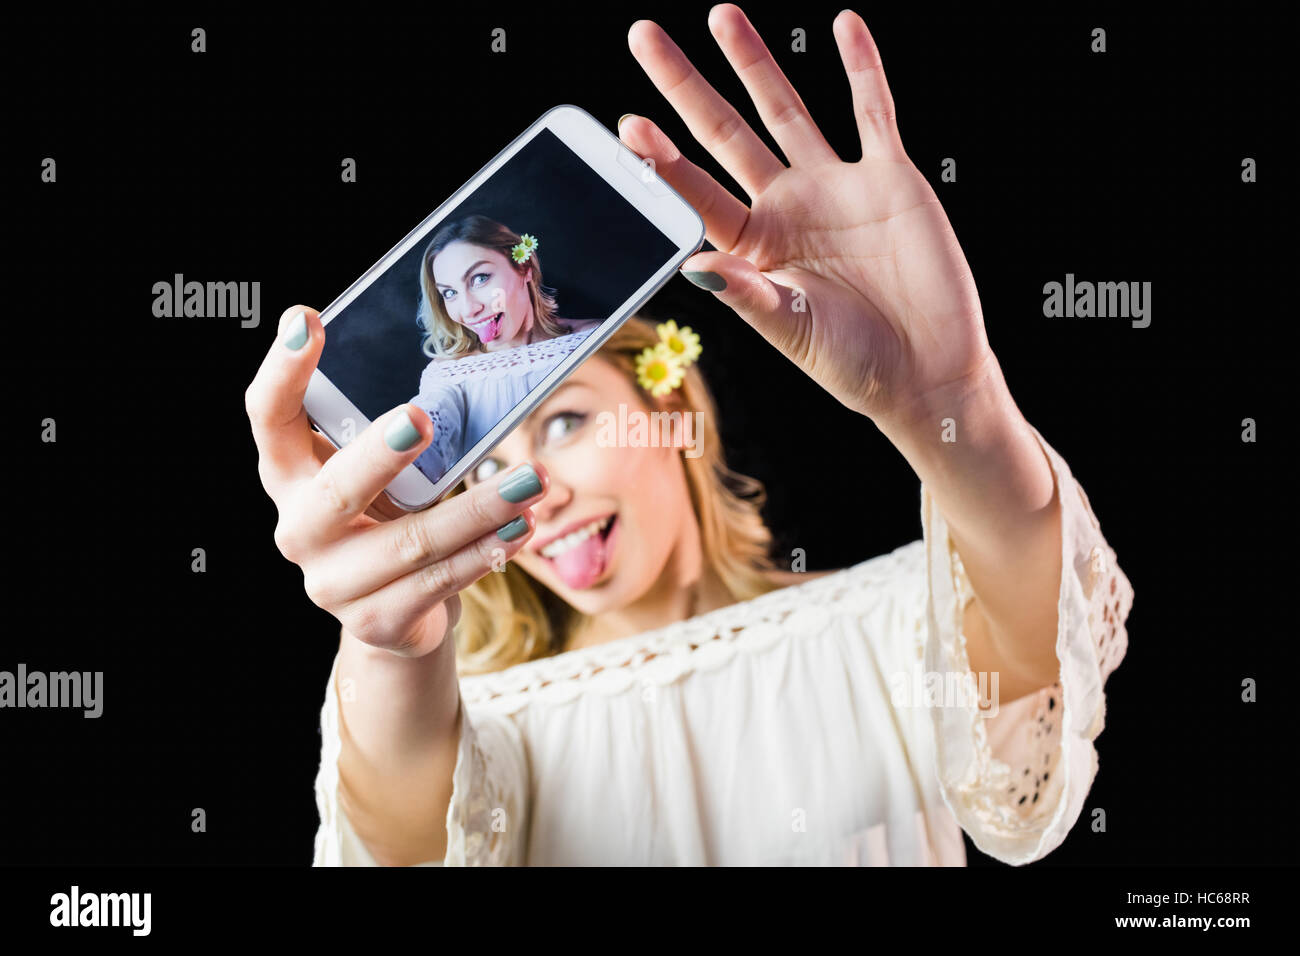 Smiling woman clicking photo from mobile phone against black background Stock Photo